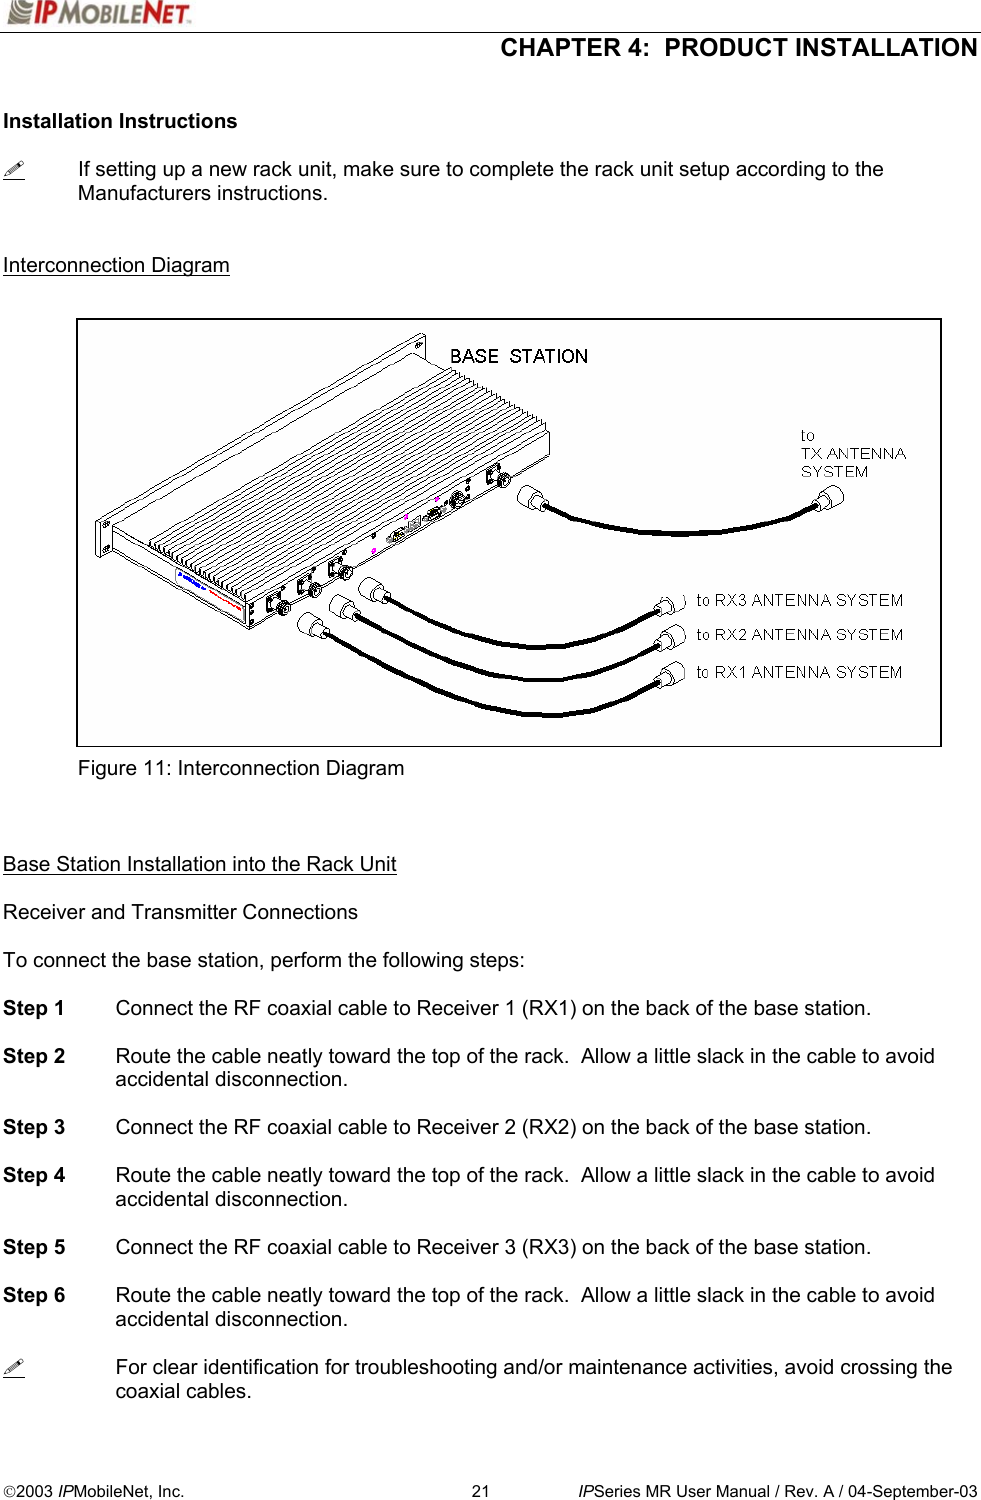  CHAPTER 4:  PRODUCT INSTALLATION  2003 IPMobileNet, Inc.  21  IPSeries MR User Manual / Rev. A / 04-September-03  Installation Instructions    If setting up a new rack unit, make sure to complete the rack unit setup according to the Manufacturers instructions.   Interconnection Diagram                     Figure 11: Interconnection Diagram    Base Station Installation into the Rack Unit  Receiver and Transmitter Connections  To connect the base station, perform the following steps:  Step 1  Connect the RF coaxial cable to Receiver 1 (RX1) on the back of the base station.  Step 2  Route the cable neatly toward the top of the rack.  Allow a little slack in the cable to avoid accidental disconnection.  Step 3  Connect the RF coaxial cable to Receiver 2 (RX2) on the back of the base station.  Step 4  Route the cable neatly toward the top of the rack.  Allow a little slack in the cable to avoid accidental disconnection.  Step 5  Connect the RF coaxial cable to Receiver 3 (RX3) on the back of the base station.  Step 6  Route the cable neatly toward the top of the rack.  Allow a little slack in the cable to avoid accidental disconnection.    For clear identification for troubleshooting and/or maintenance activities, avoid crossing the coaxial cables. 